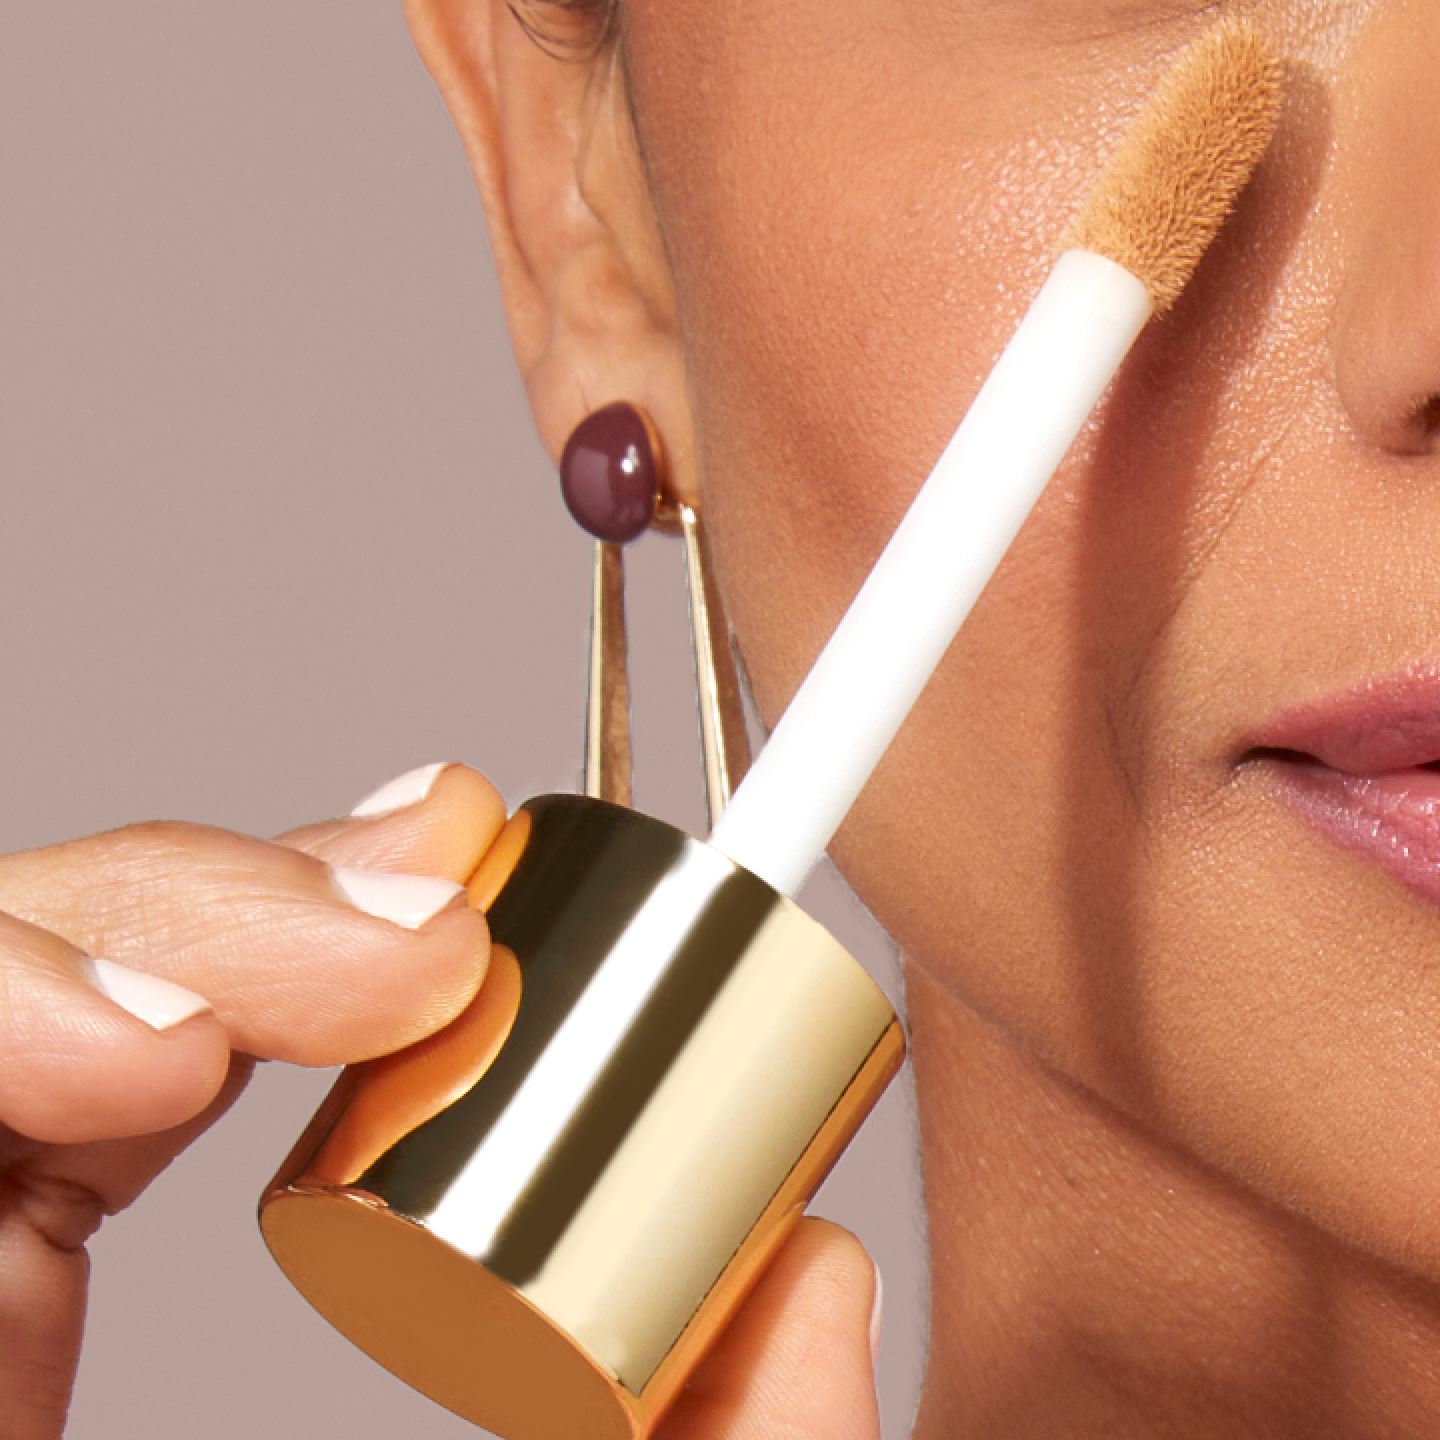 We designed this foundation with a foolproof sponge applicator, so you can dab it exactly where you need it.